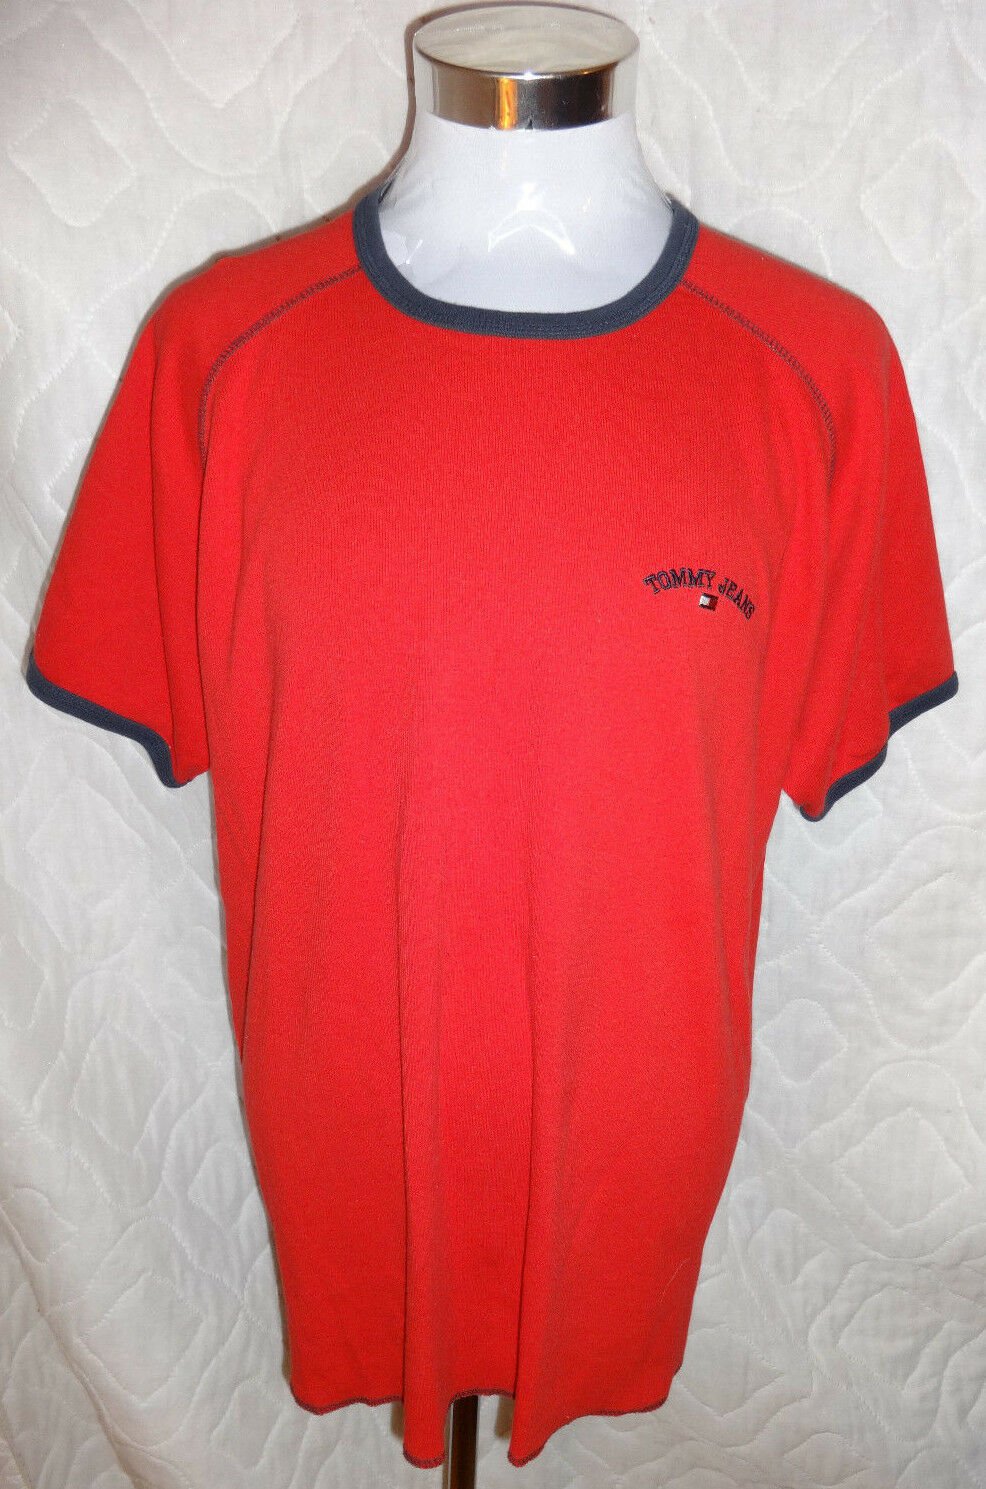 Tommy Hilfiger Vintage Tommy Jeans Red Shirt Mens 2xl Xxl Flag Ribbed